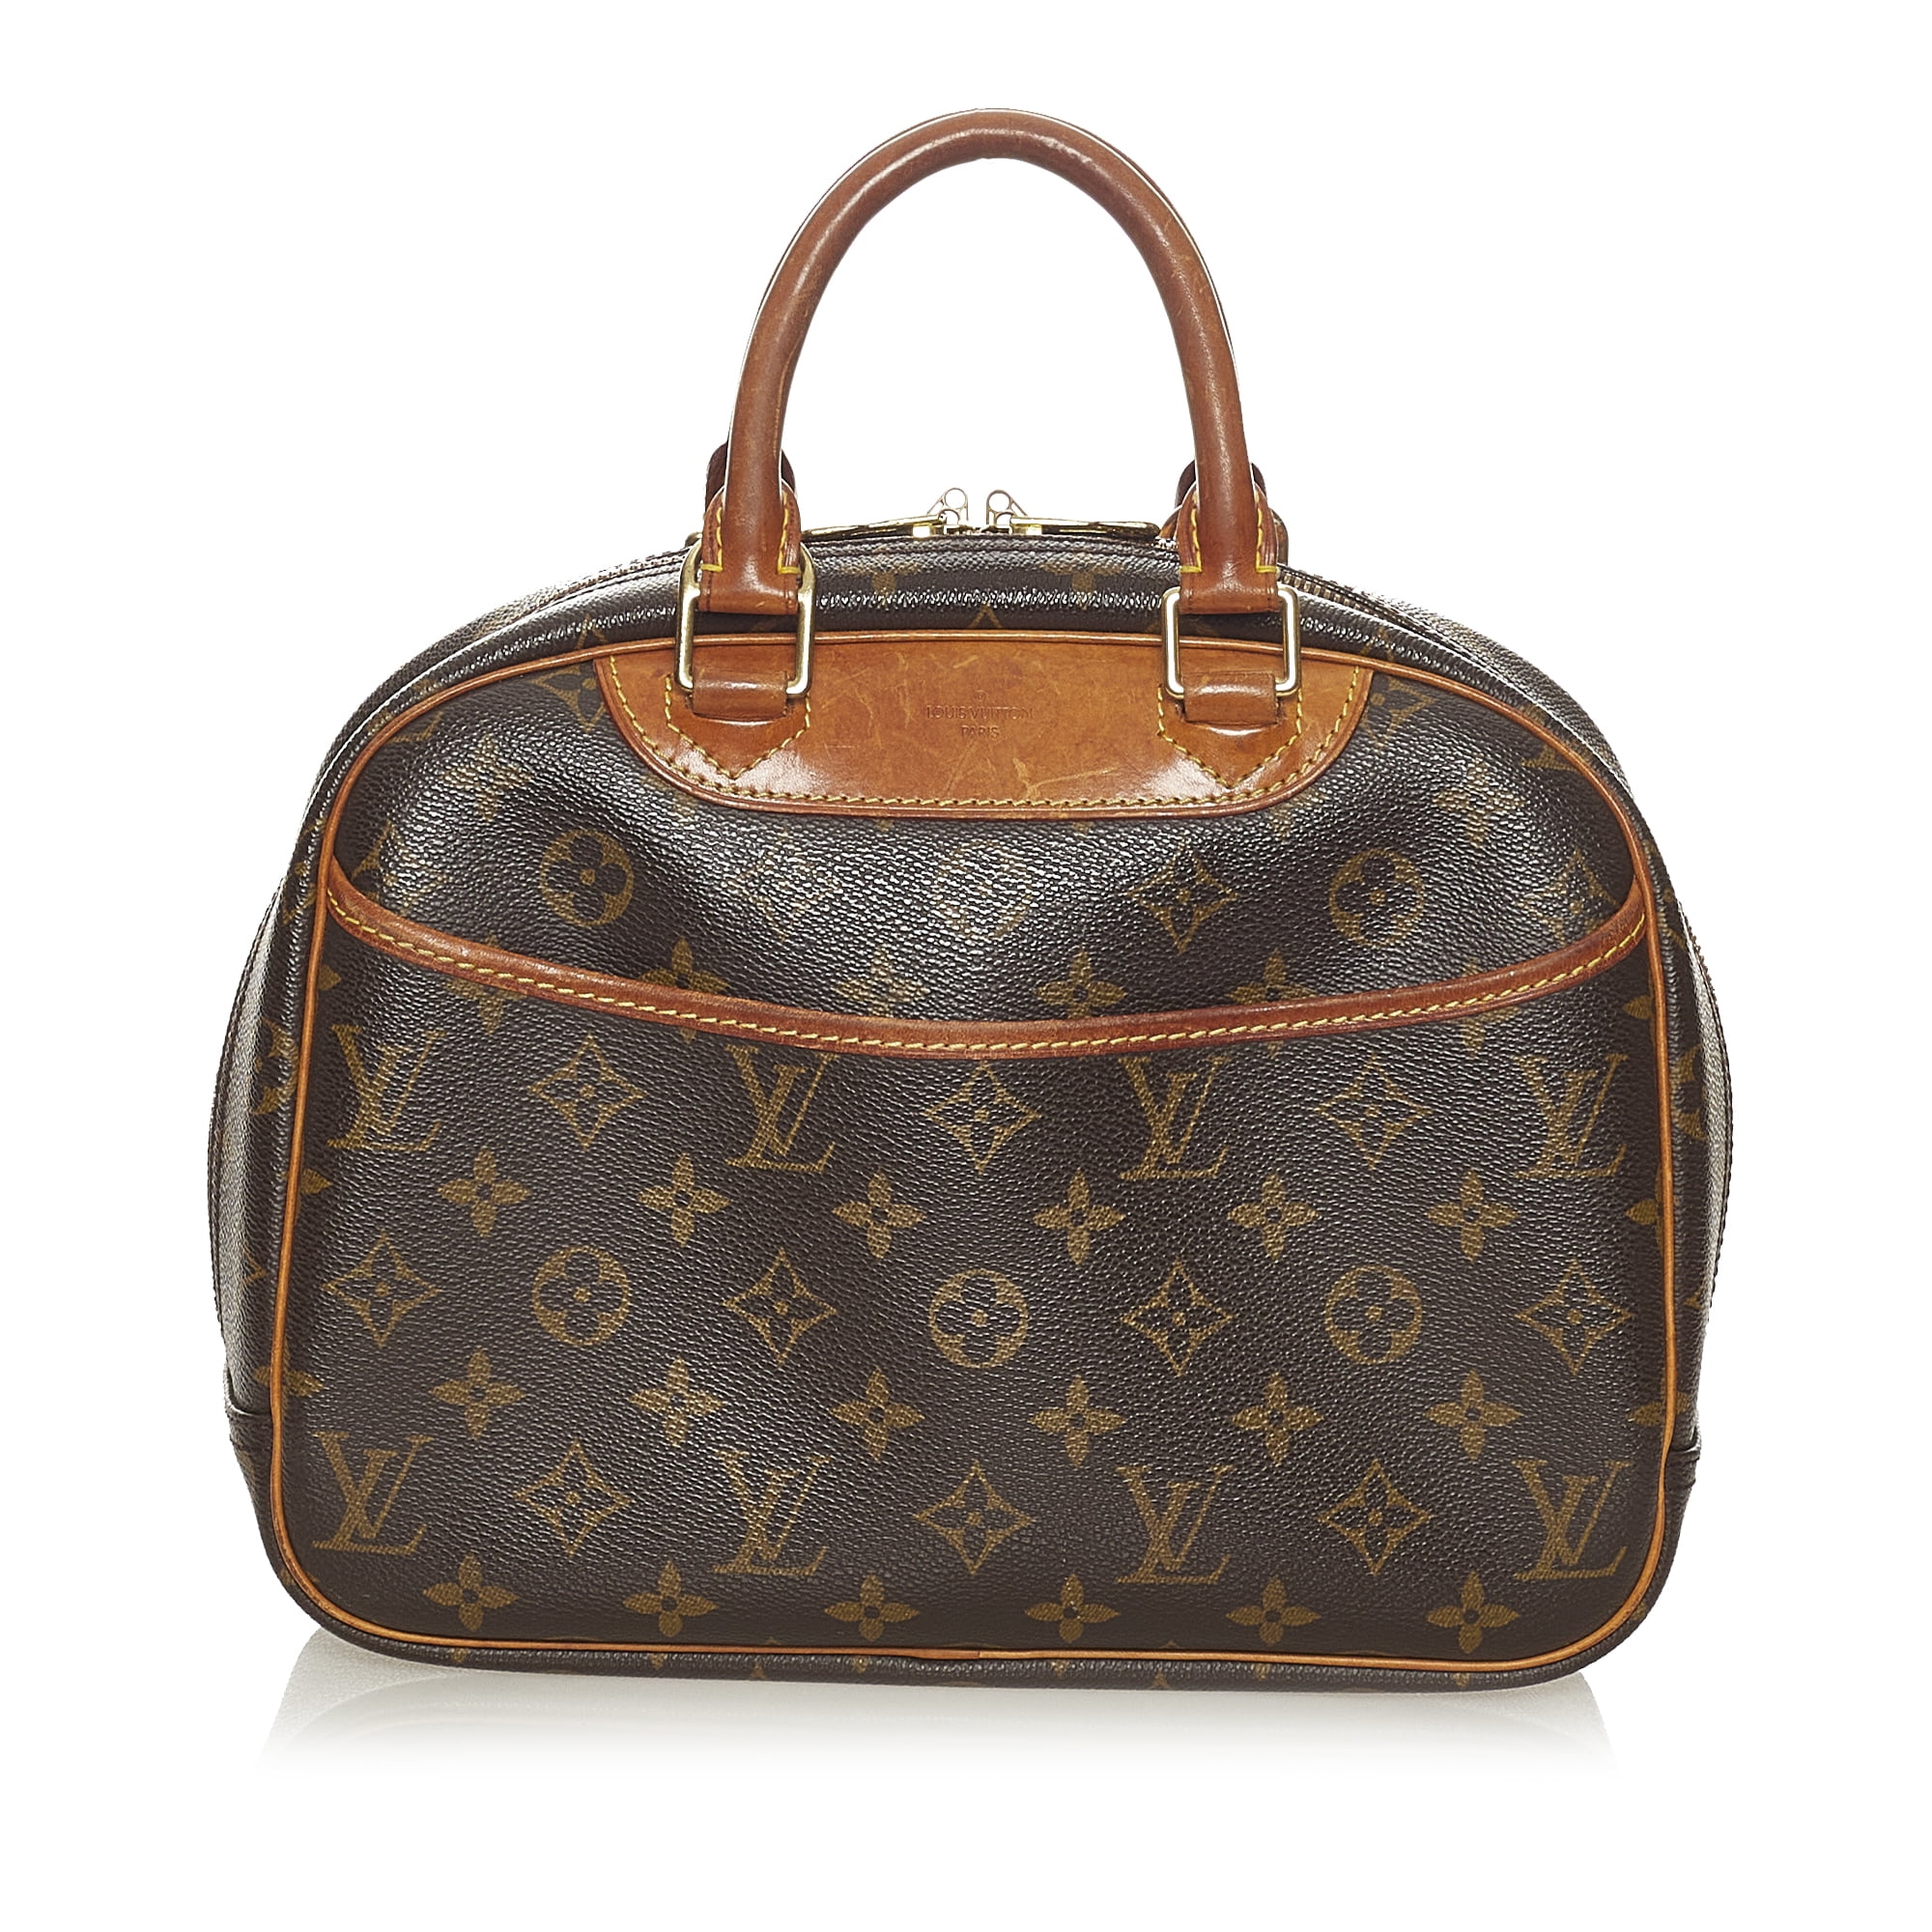 Pre-Owned Louis Vuitton Monogram Leather Very One Handle Bag